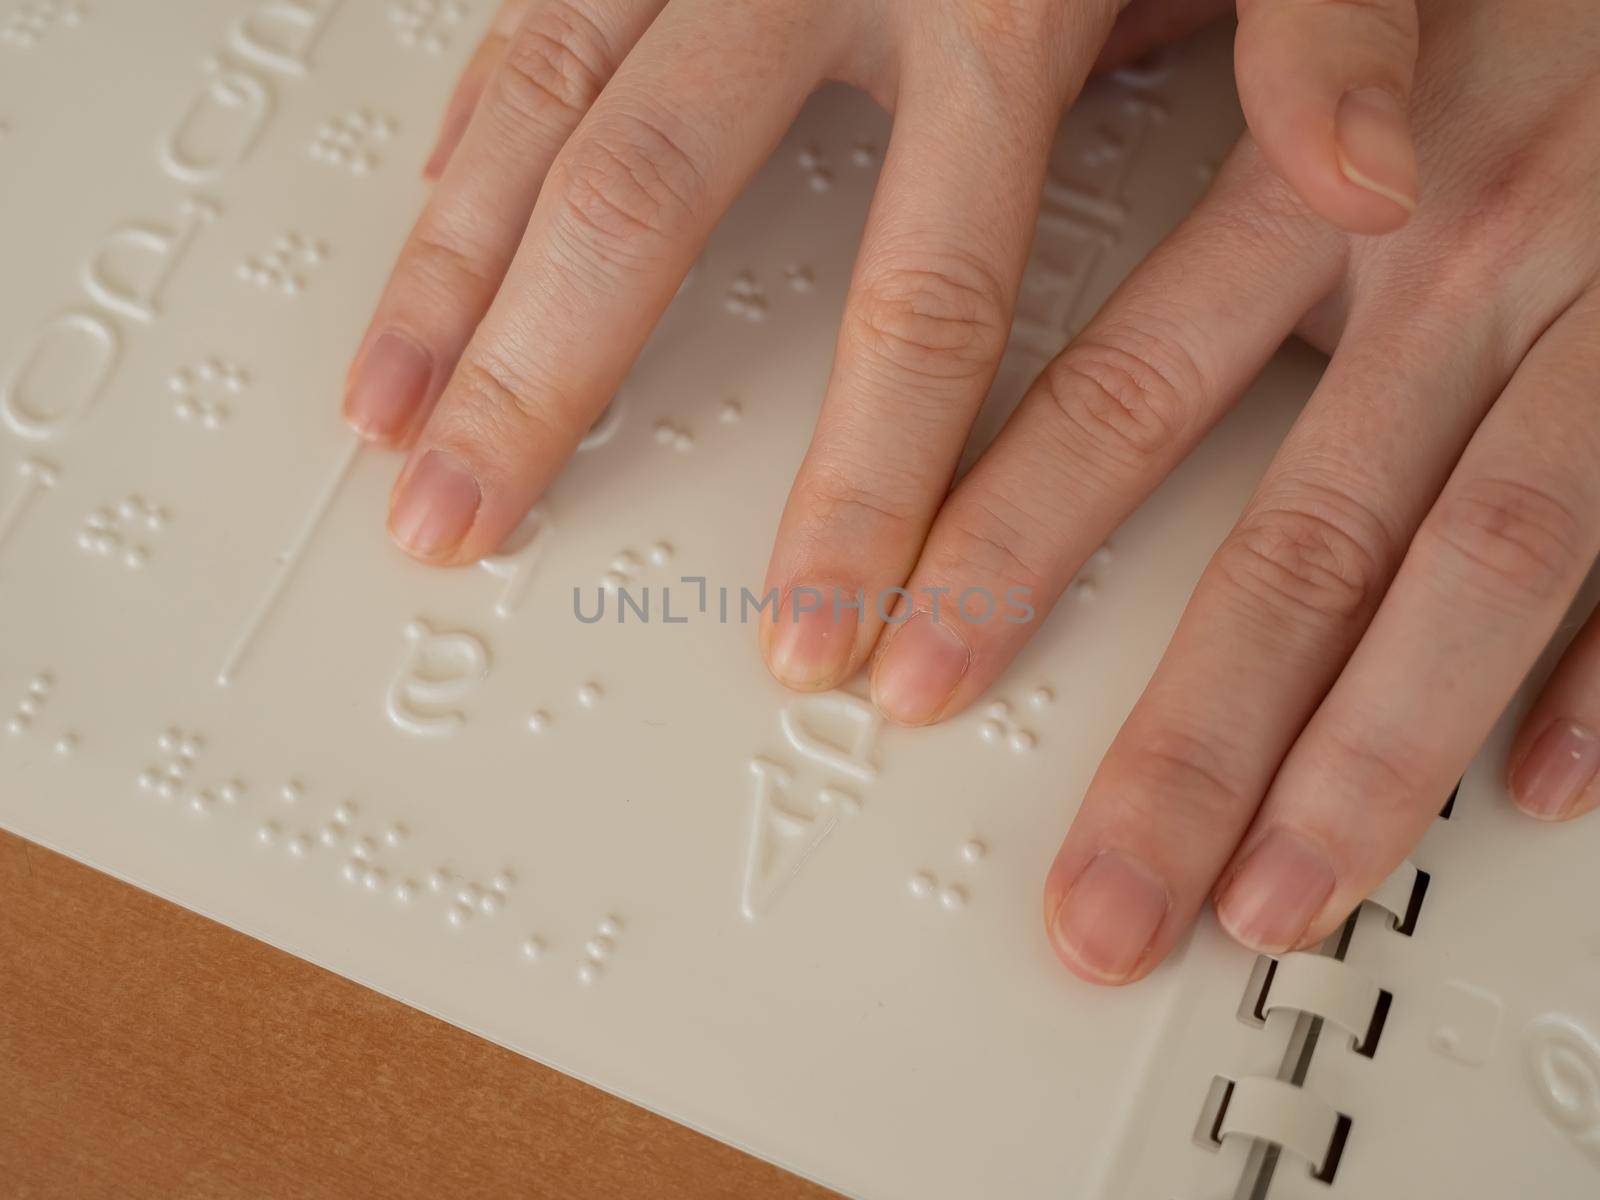 A woman learns the Braille alphabet using a decoder. by mrwed54